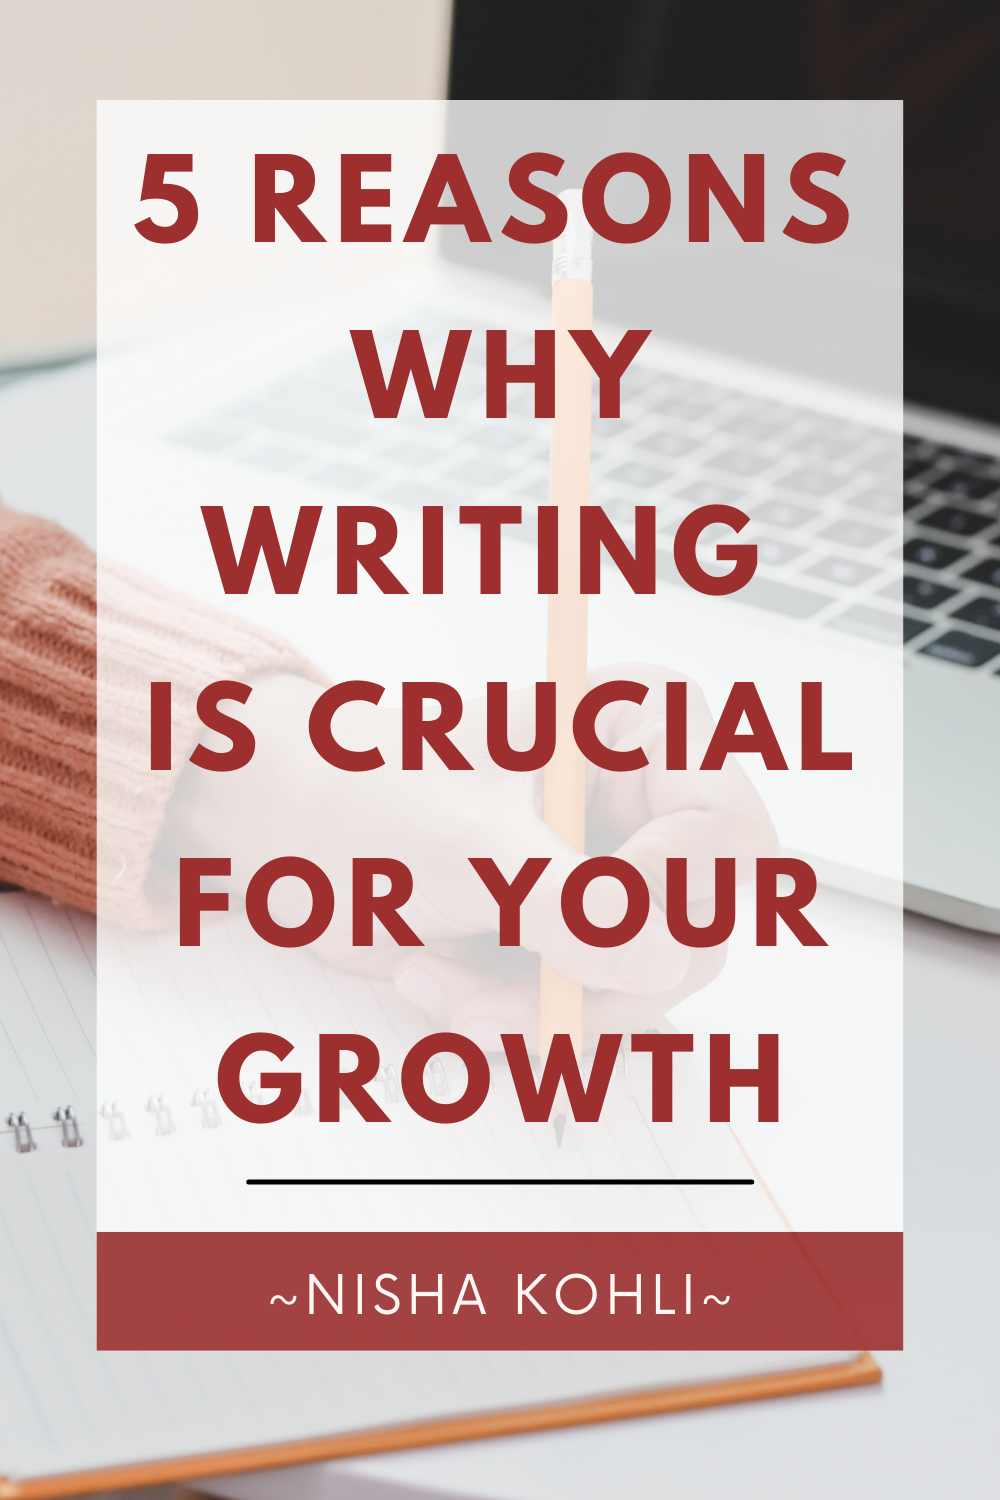 This pin is about 5 reasons why writing is crucial for your growth